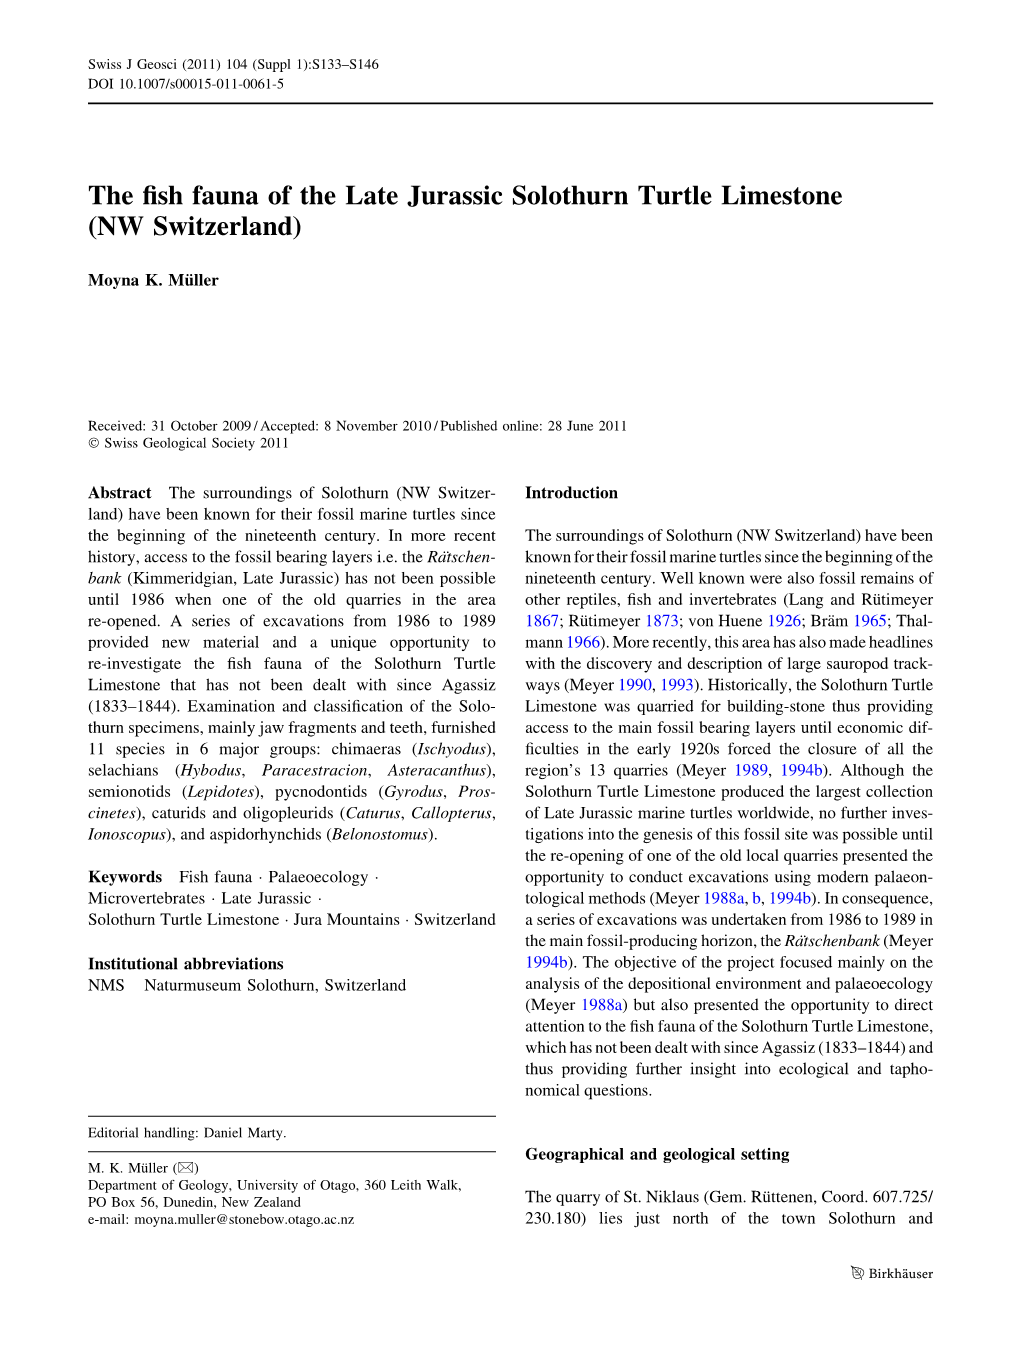 The Fish Fauna of the Late Jurassic Solothurn Turtle Limestone (NW